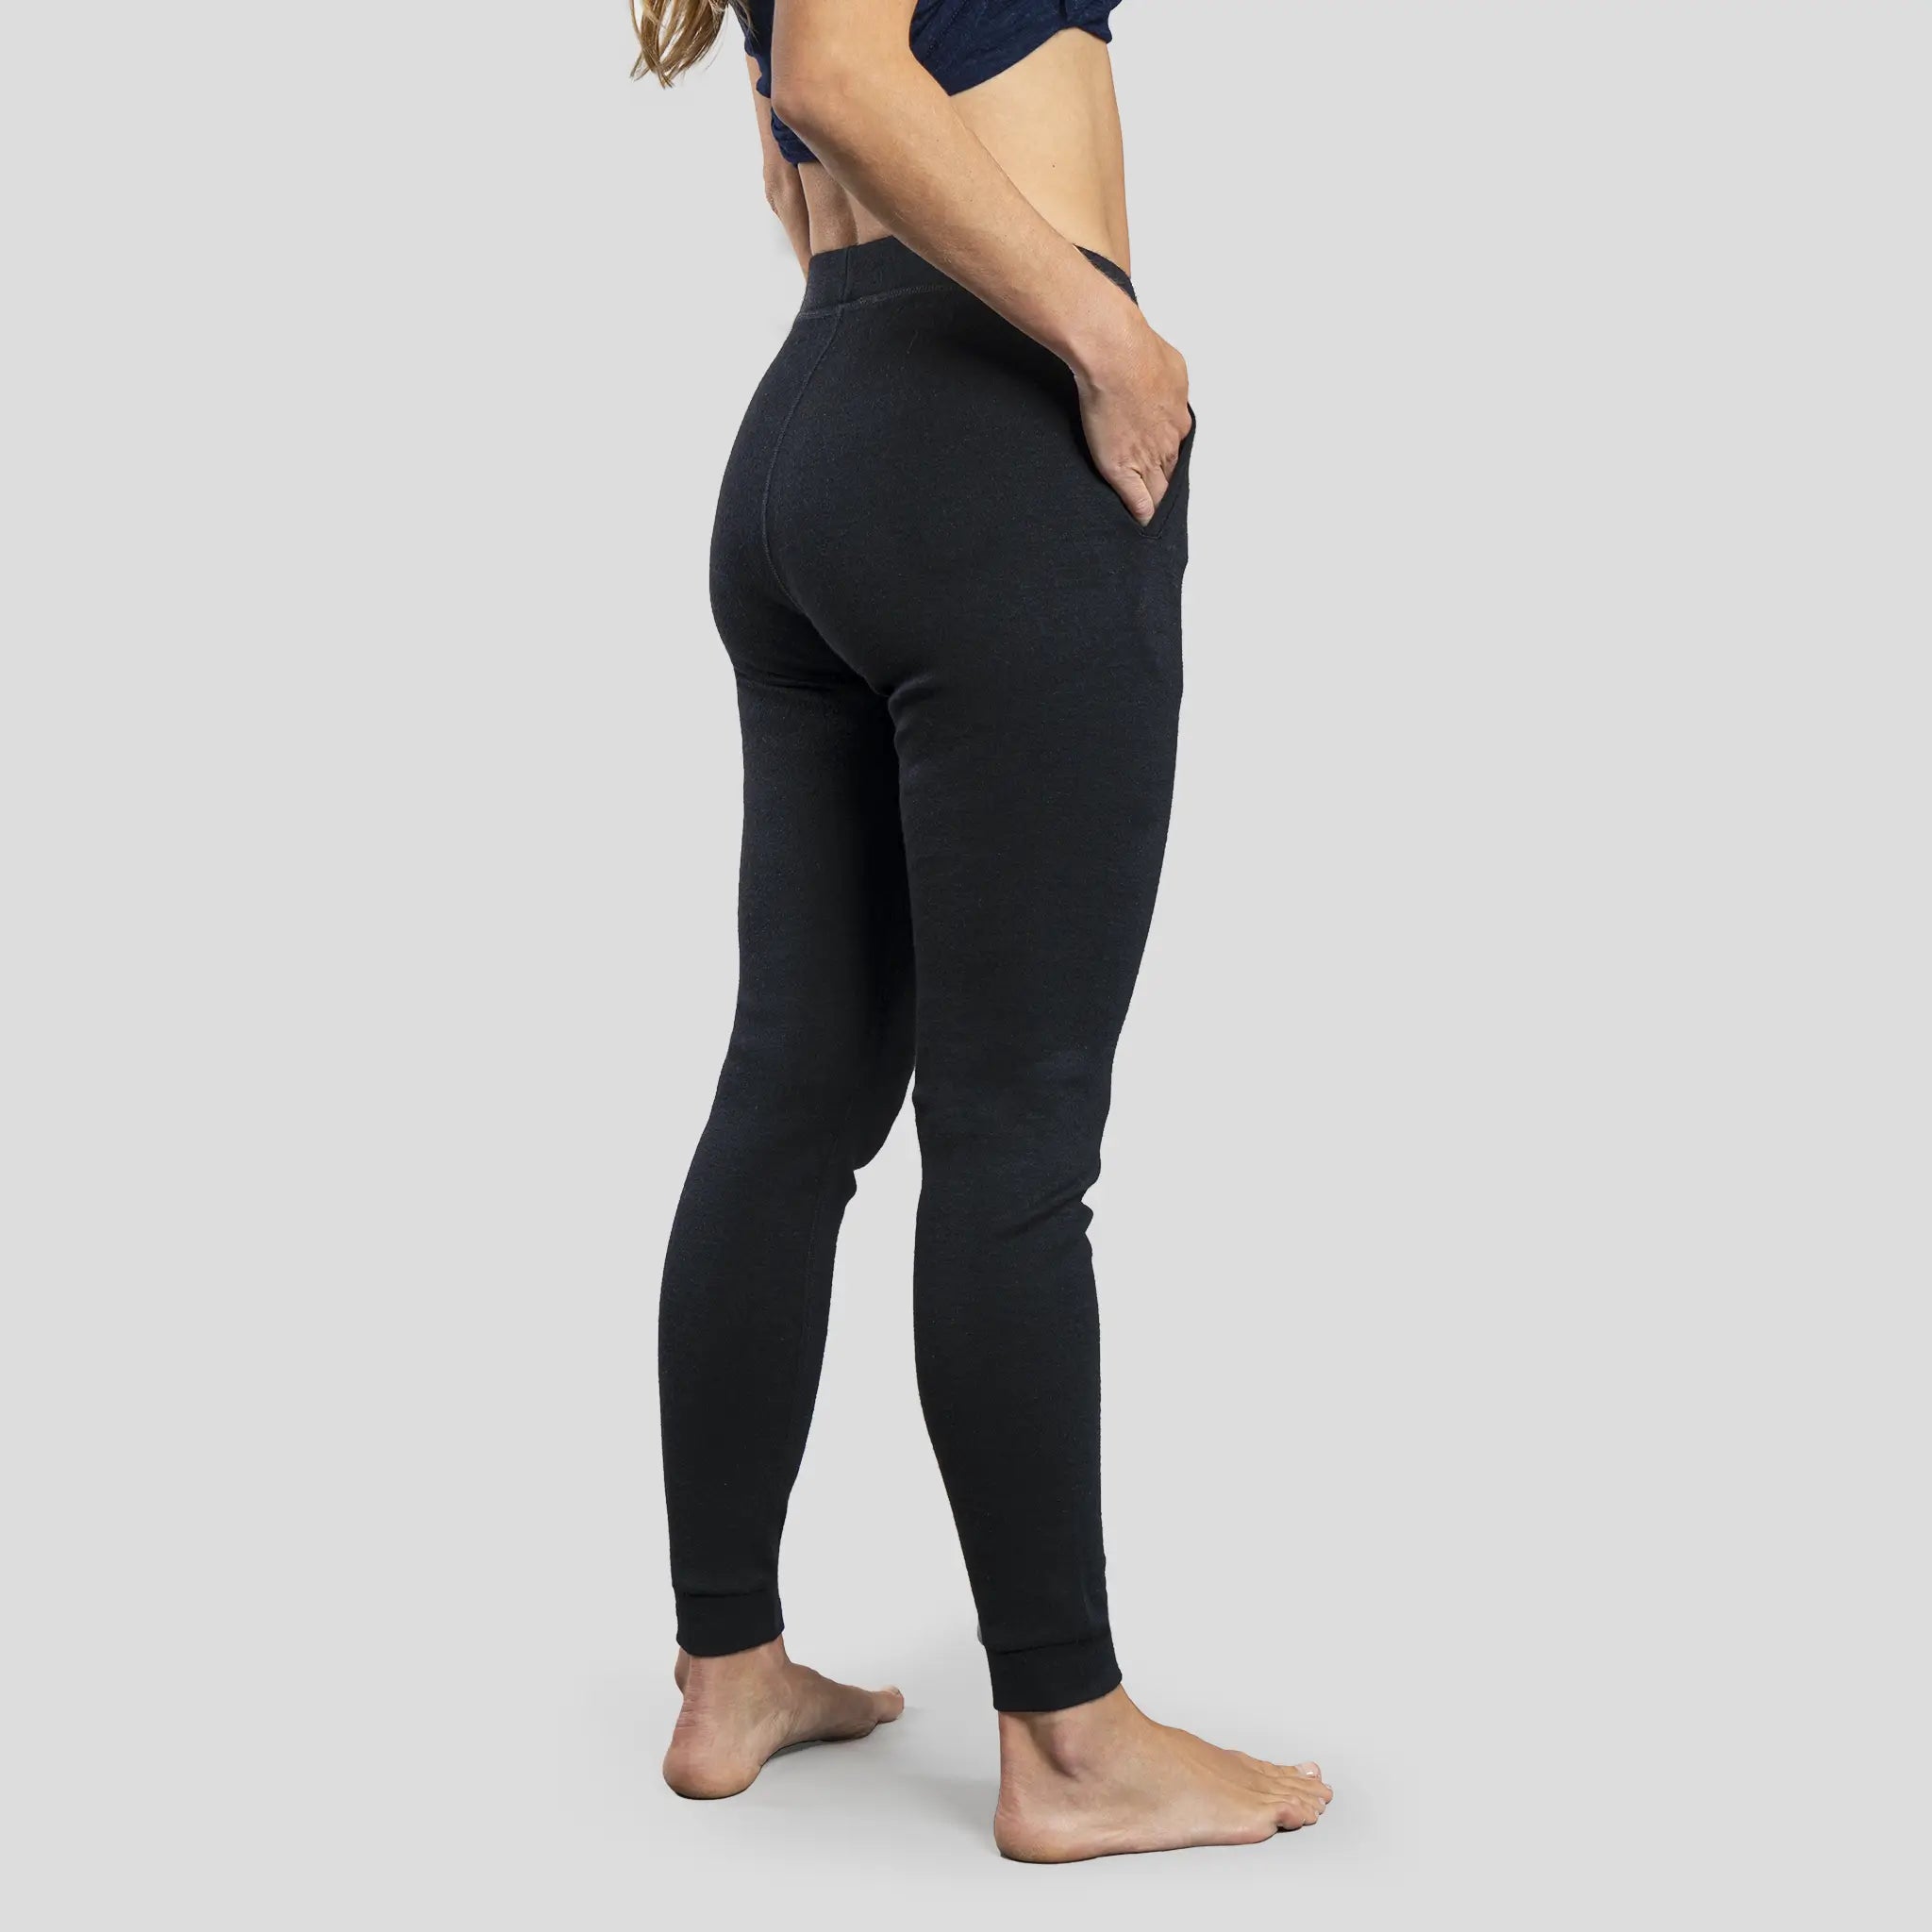 womens all purpose sweatpants midweight color black